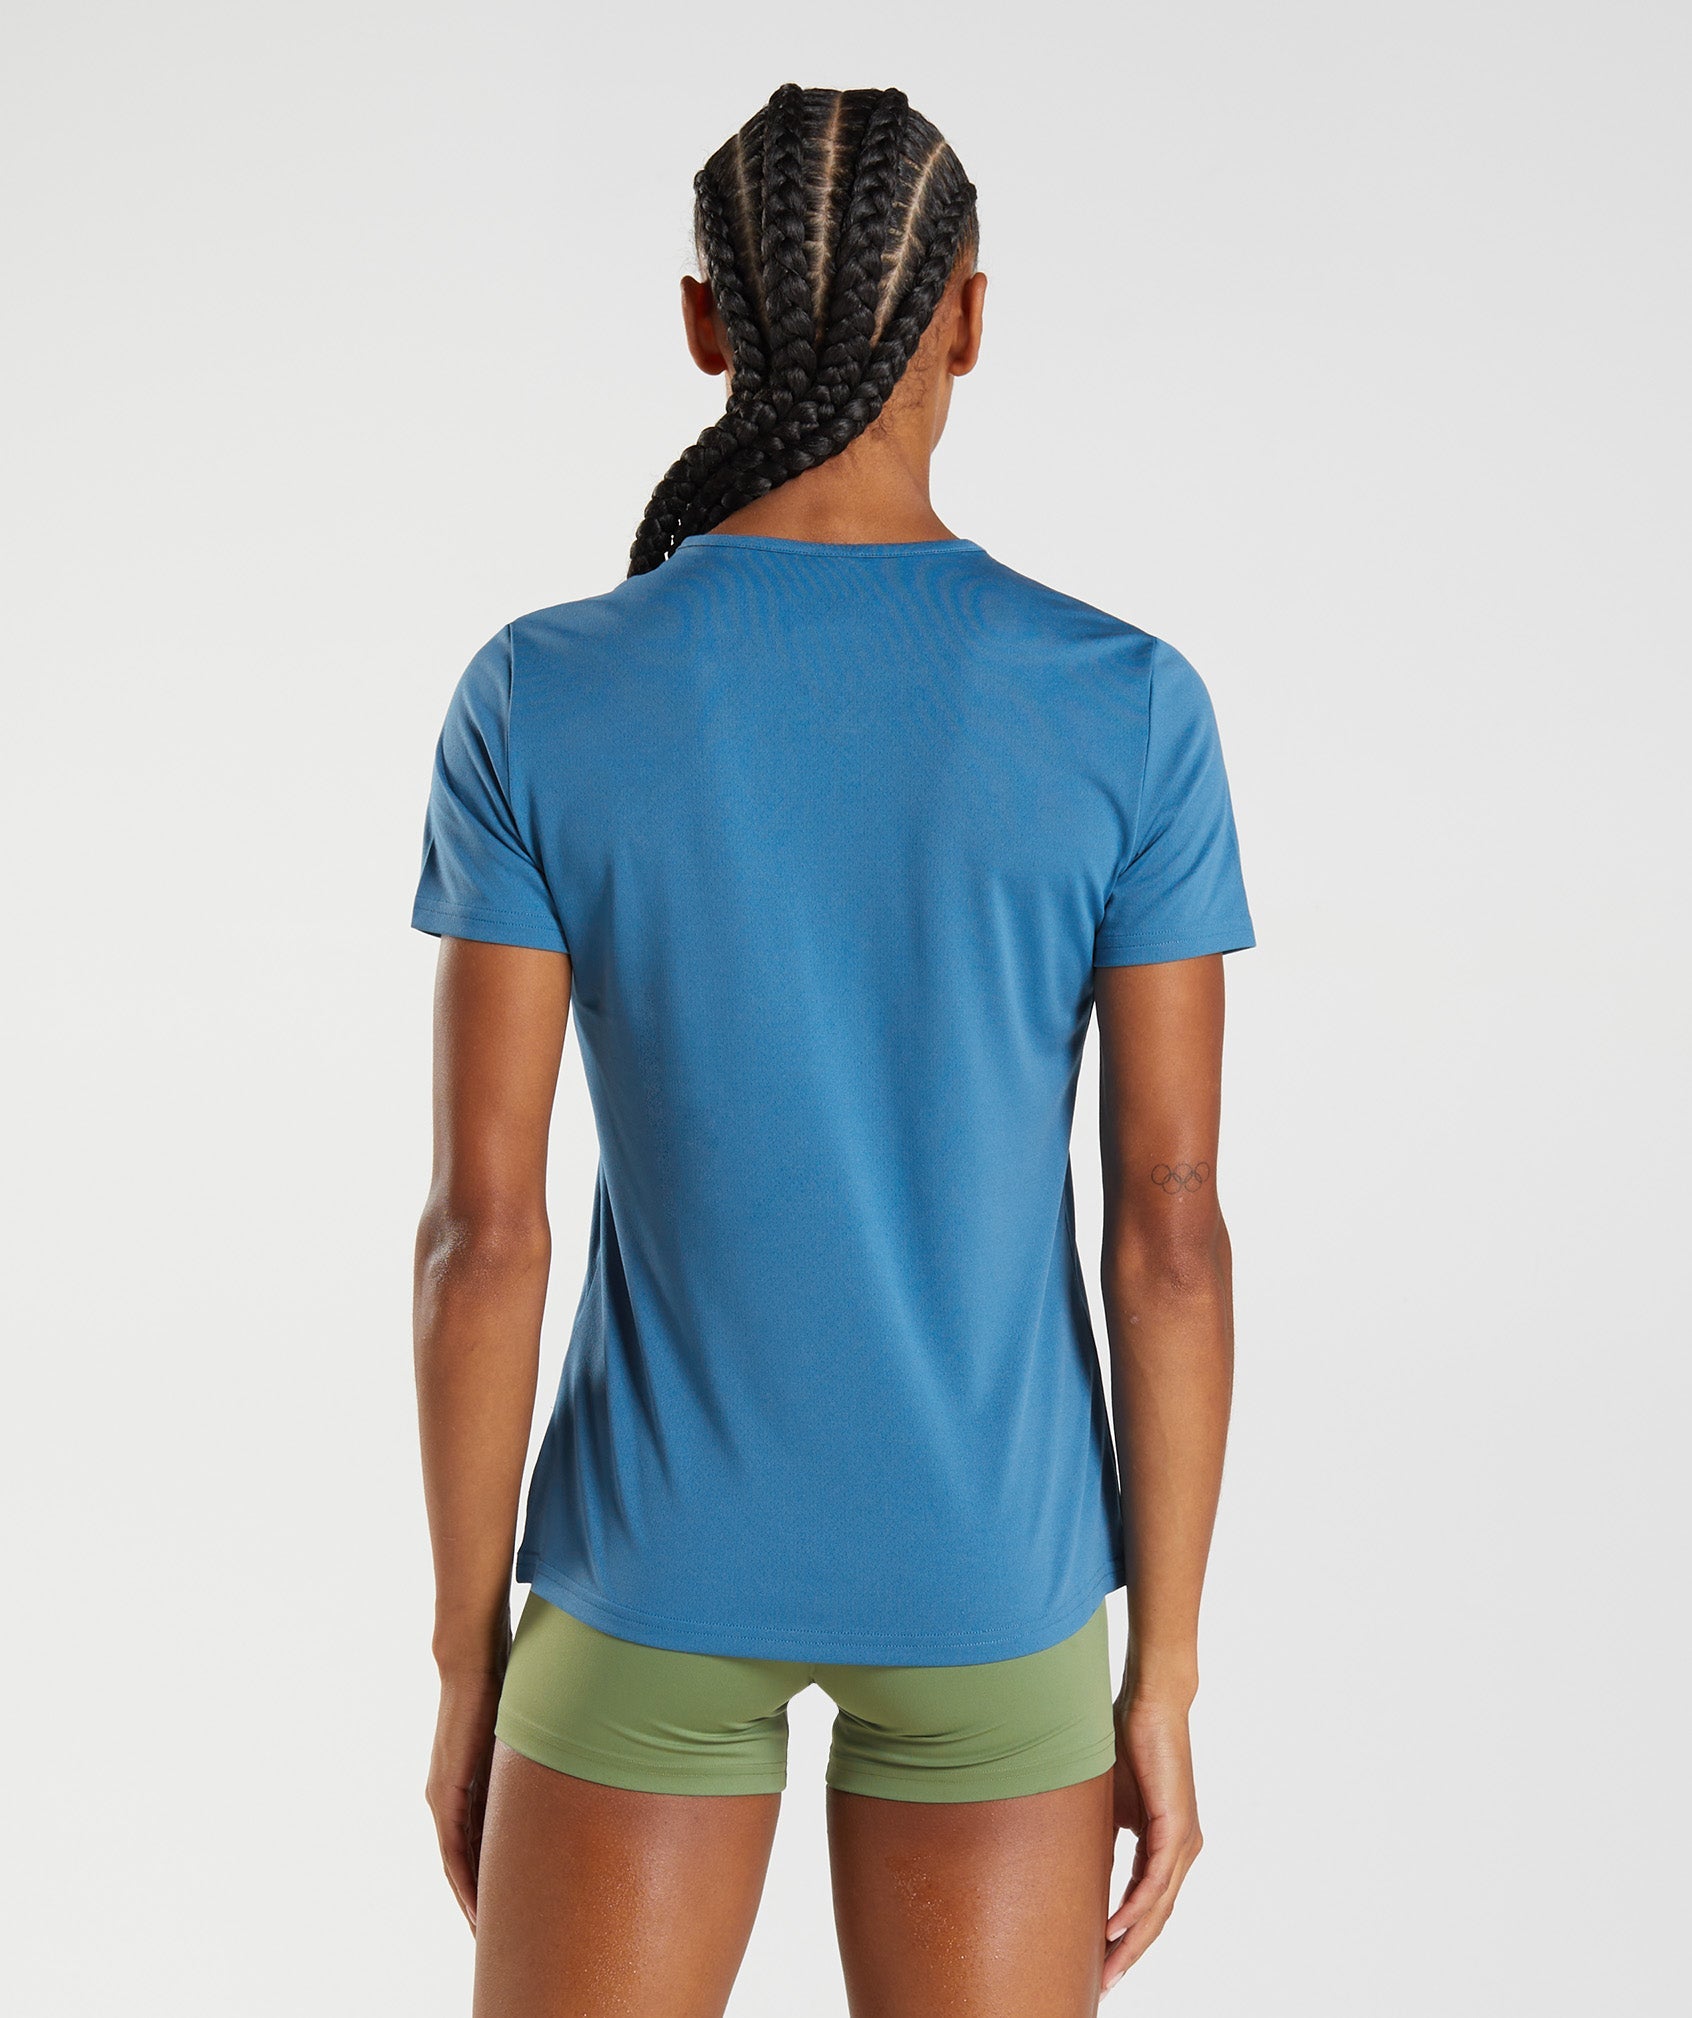 Training T-Shirt in Lakeside Blue - view 2